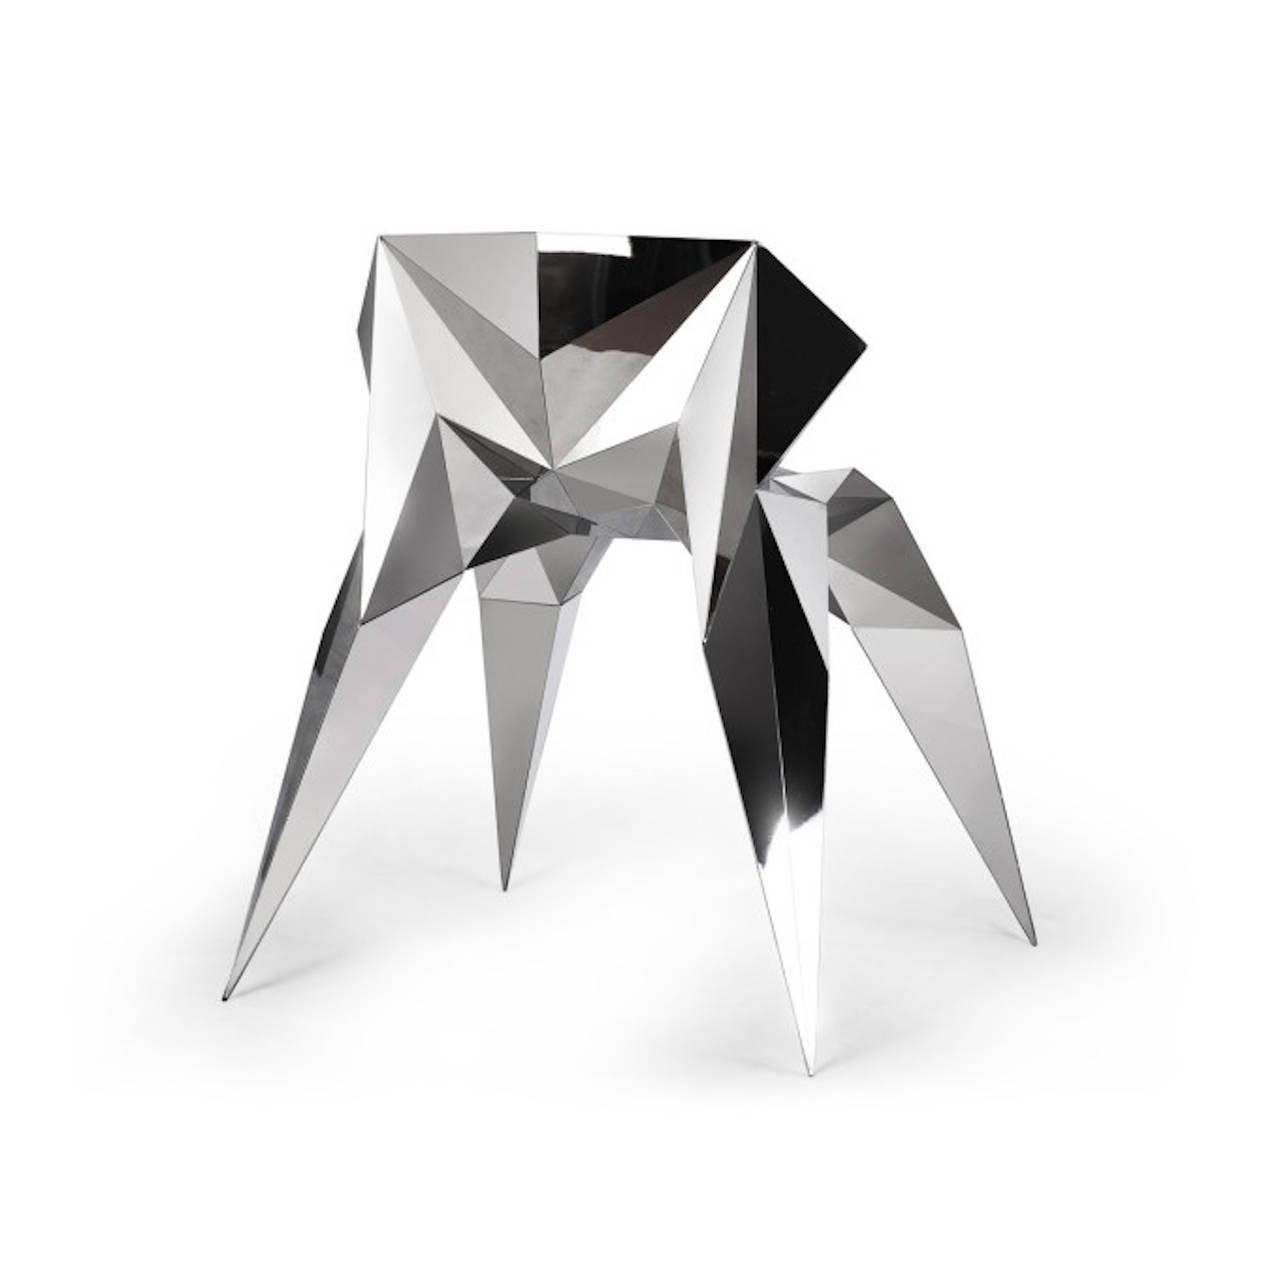 Chinese Heart Chair with Mirror Finish Stainless Steel by Zhoujie Zhang For Sale